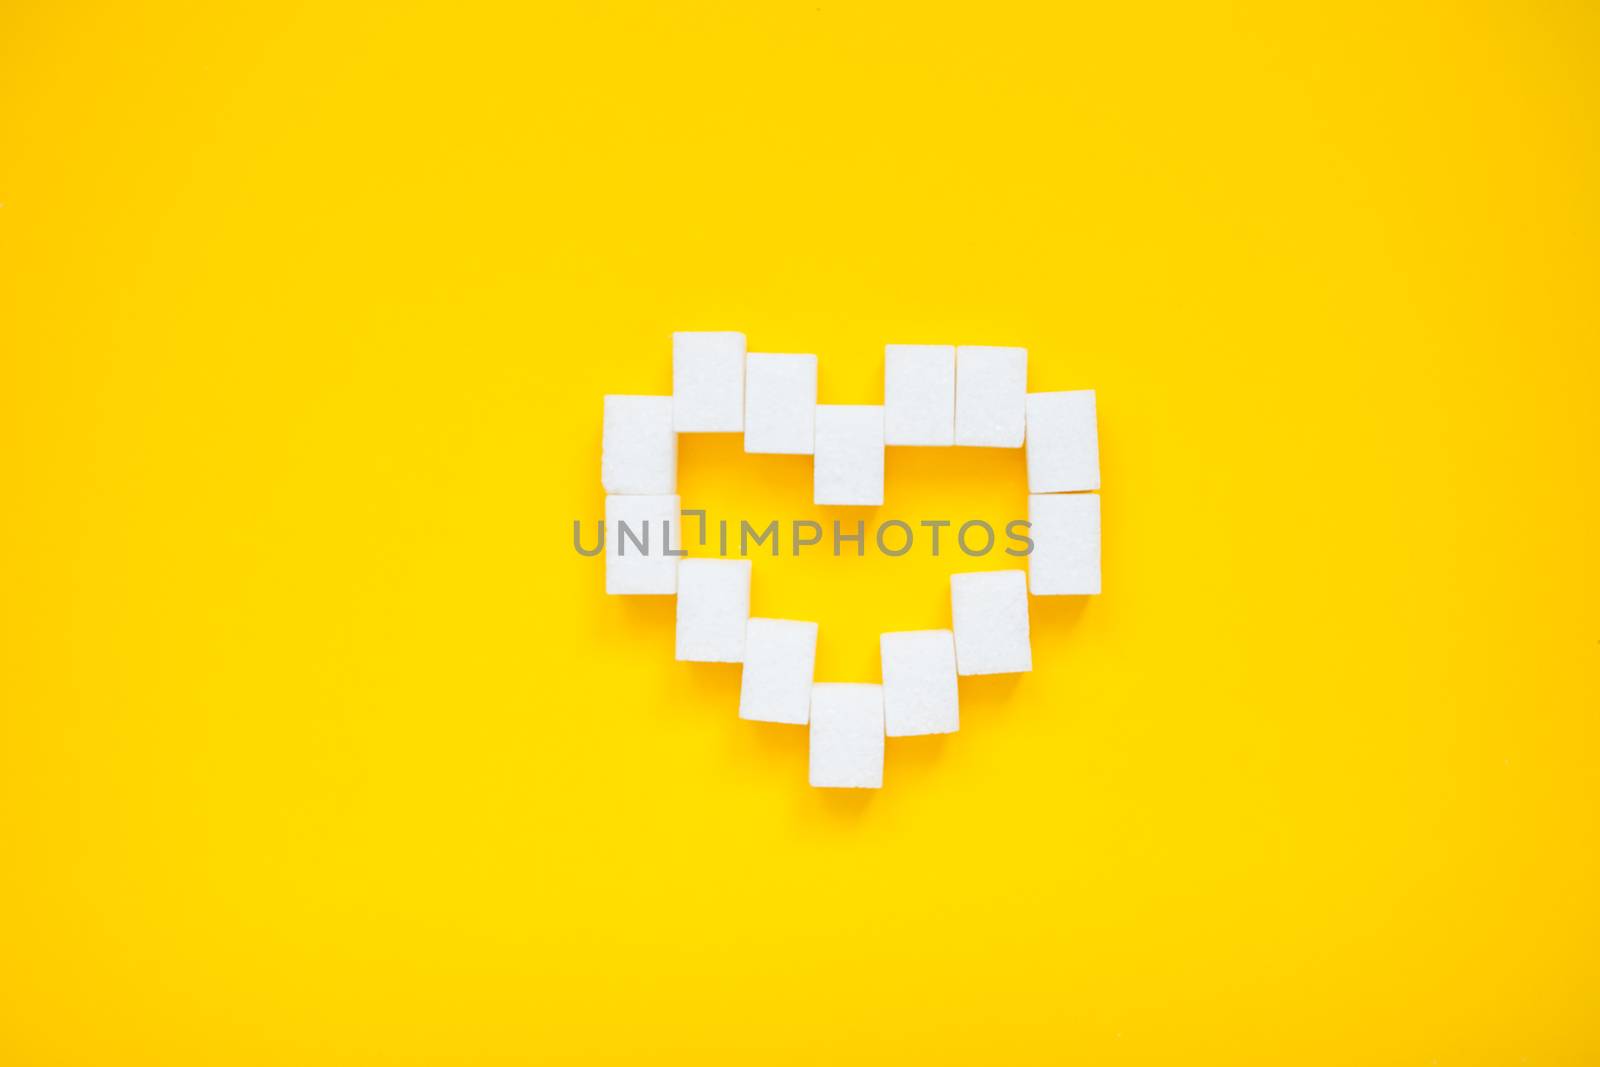 Heart made of pressed sugar cubes on a yellow background. Diabetes.